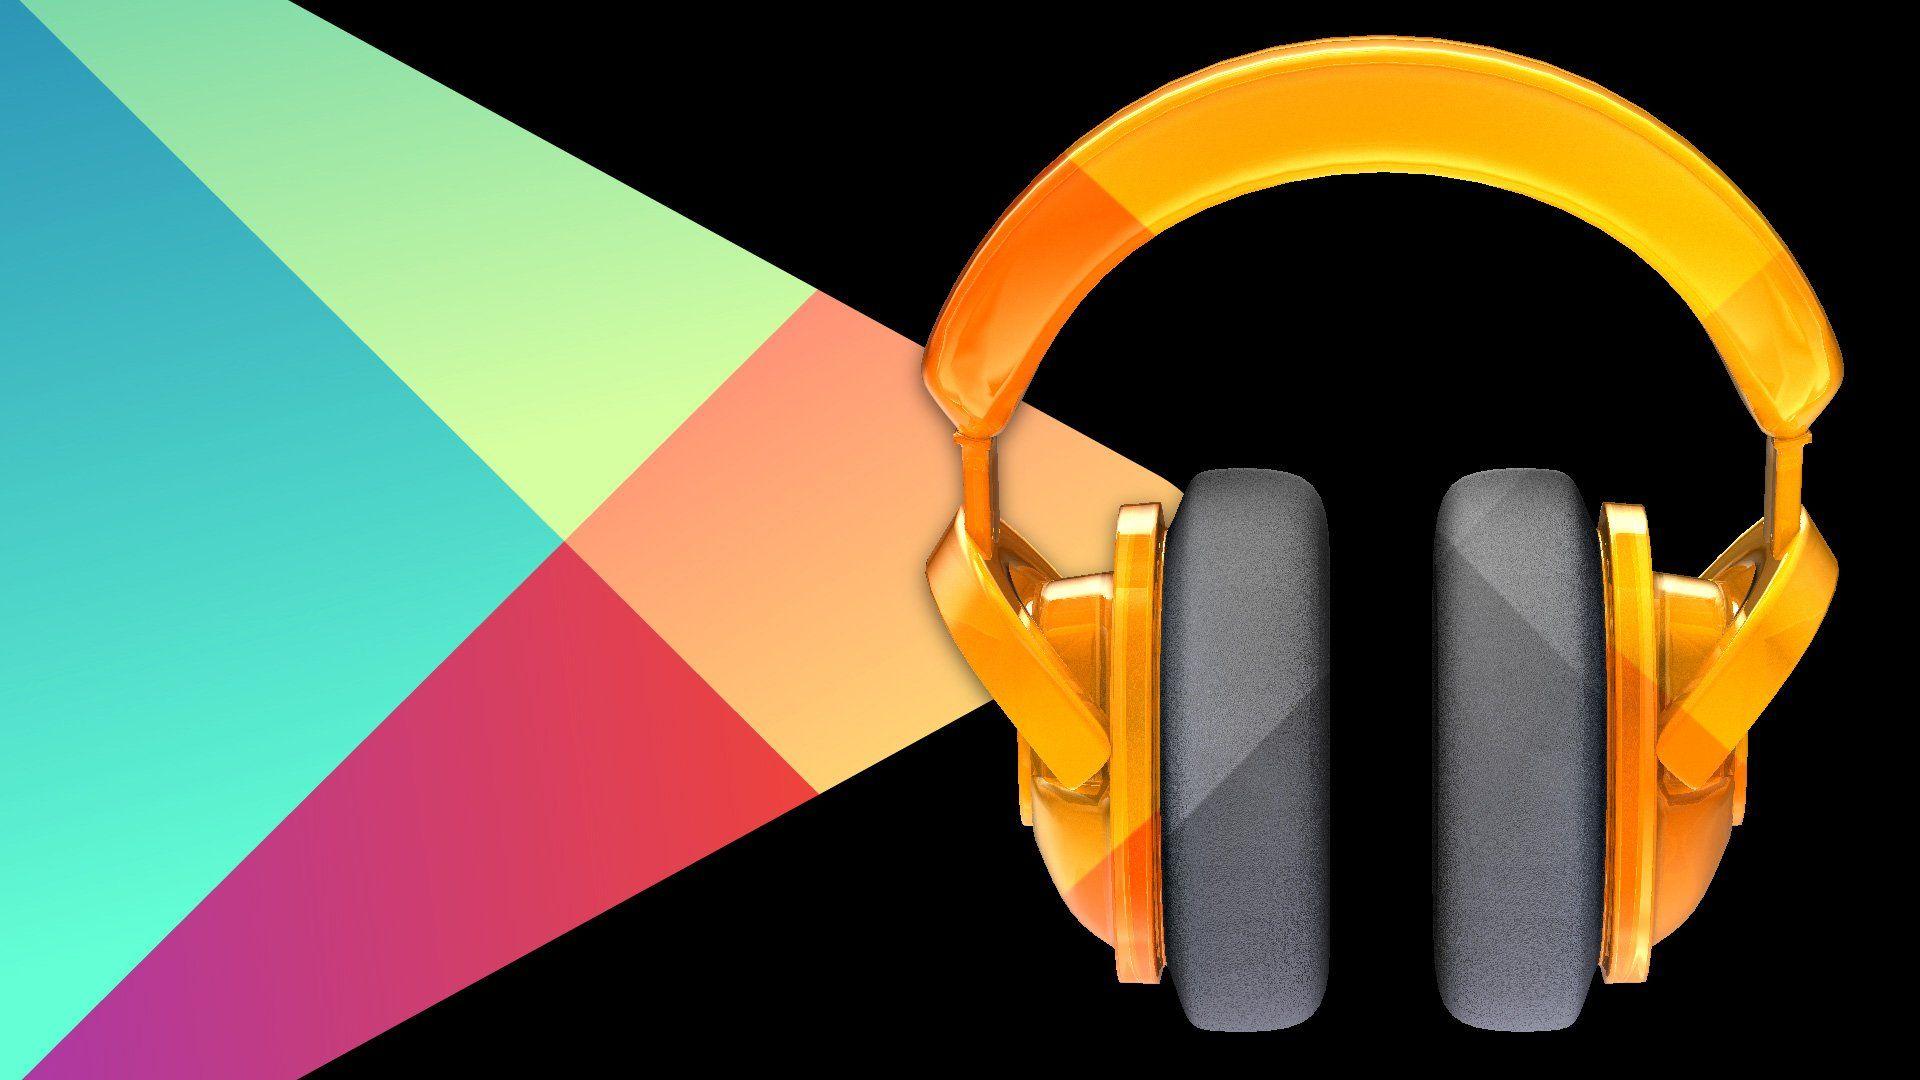 You can now store up to 000 songs with Google Play Music